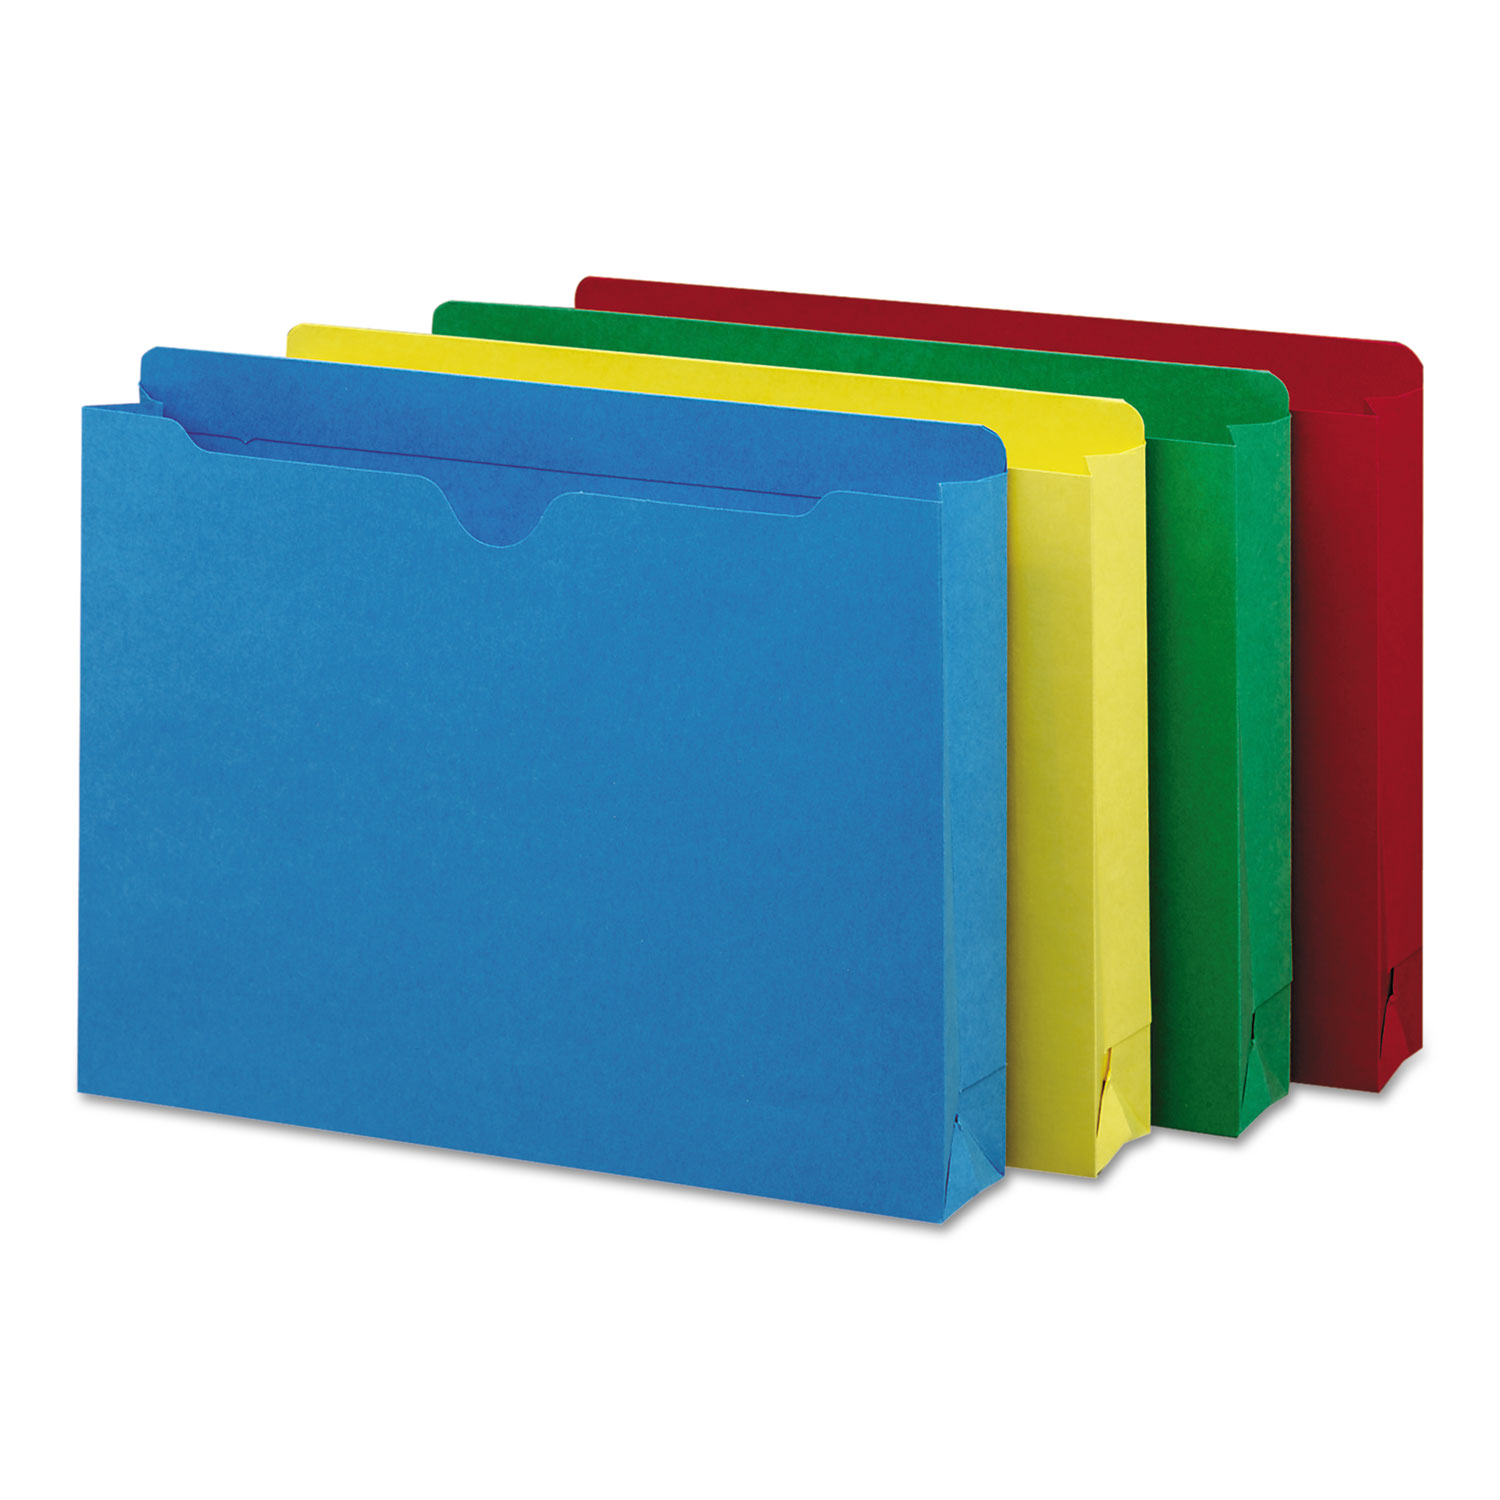  Smead 75673 Colored File Jackets with Reinforced Double-Ply Tab, Straight Tab, Letter Size, Assorted Colors, 50/Box (SMD75673) 